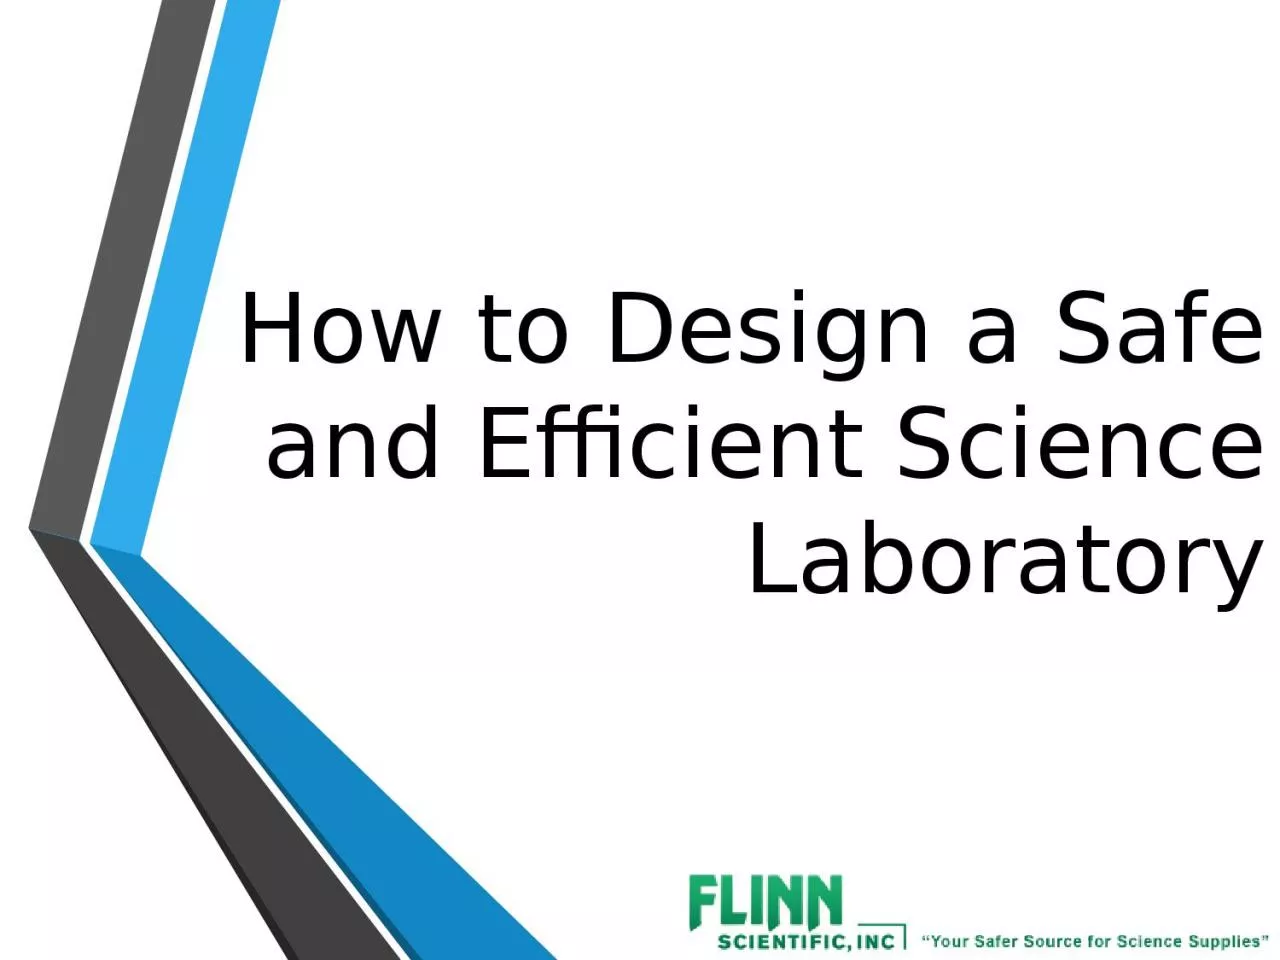 How to Design a Safe and Efficient Science Laboratory